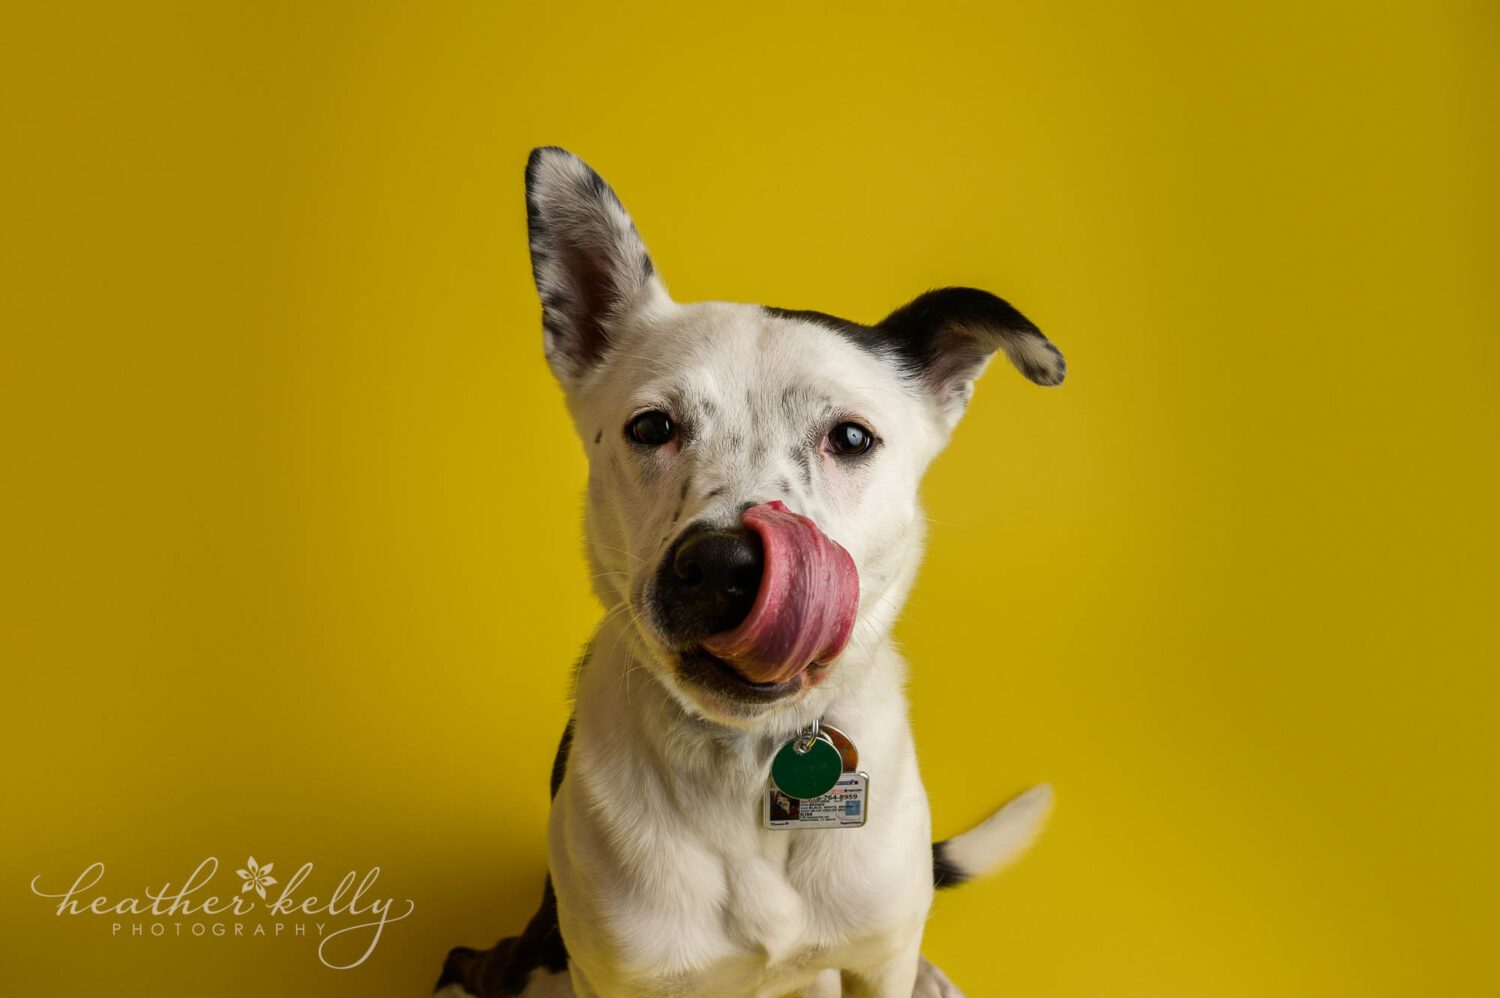 a dog licks her nose while looking at the camera. There is a bright yellow background 